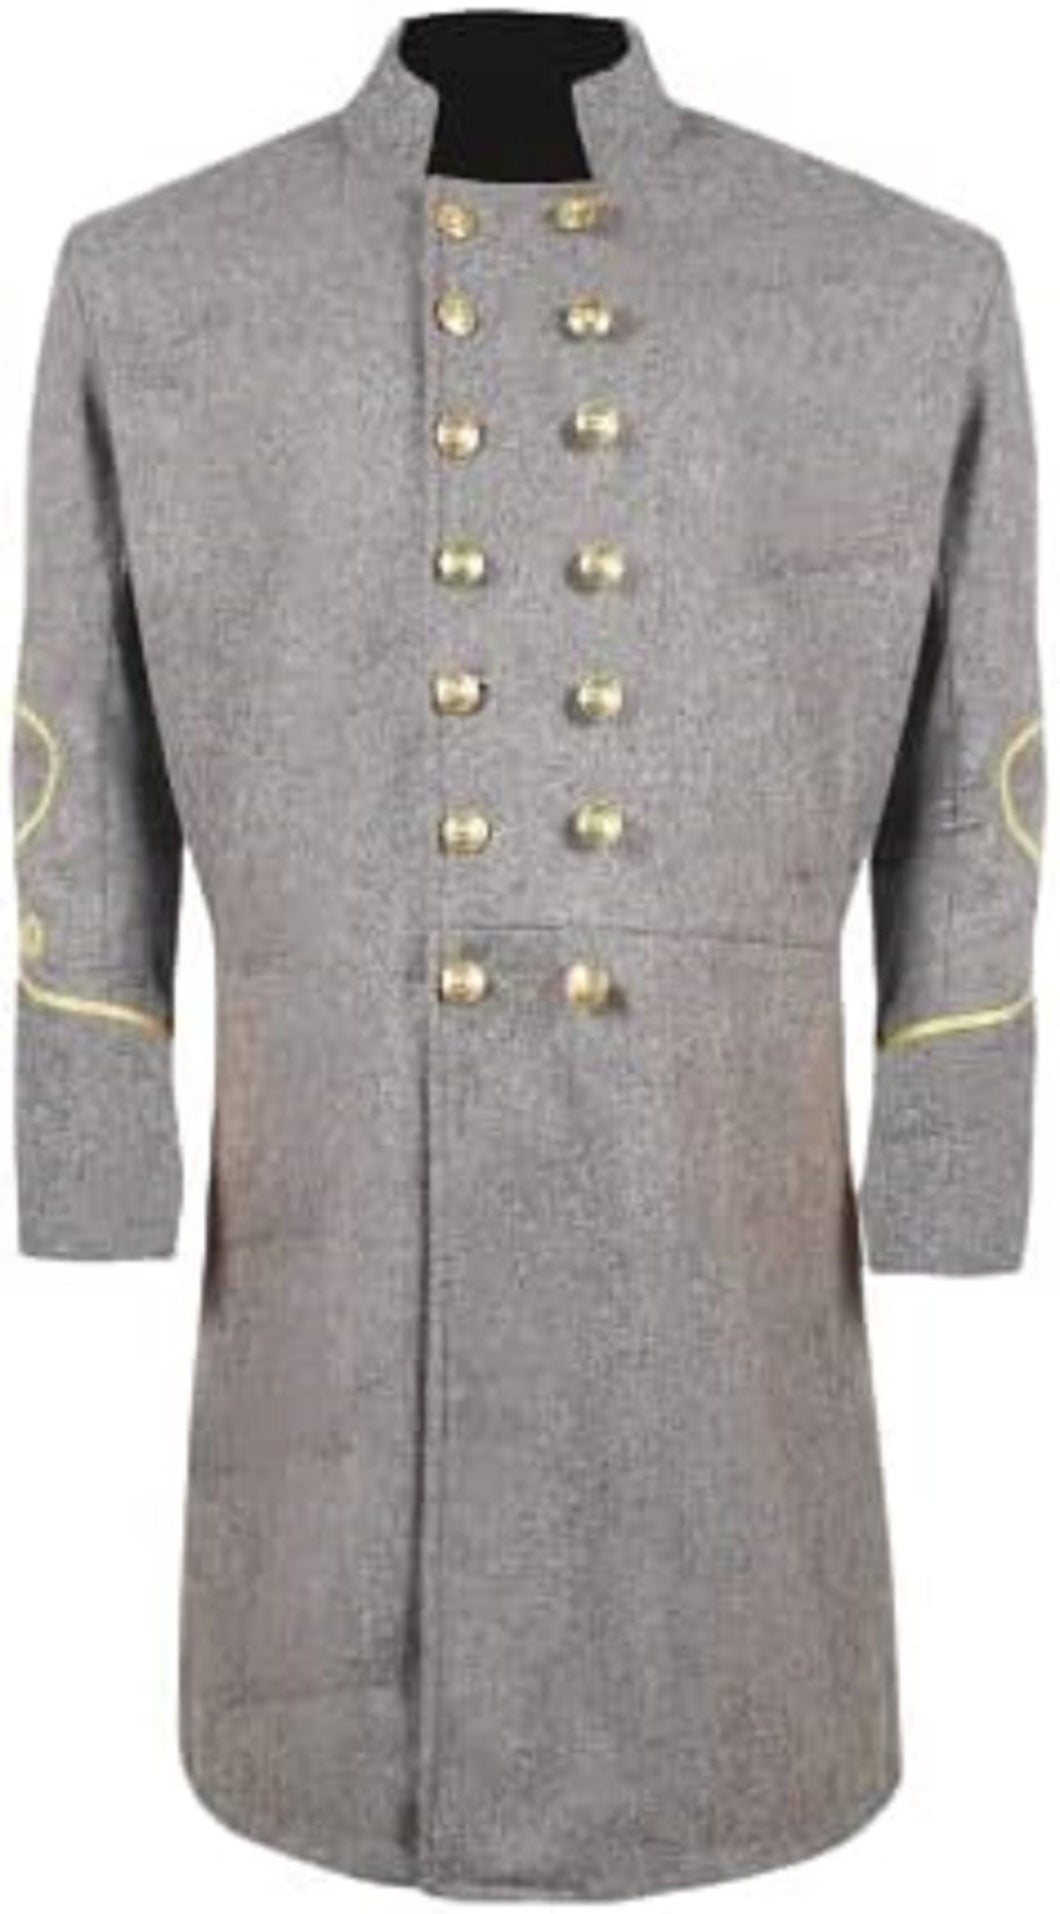 Civil War CS Officer's Double Breast 3 Rows Braid Grey Wool Frock Coat - Civil War CS Officer's Single Breast 4 rows Braid Grey Wool Frock Coat - 